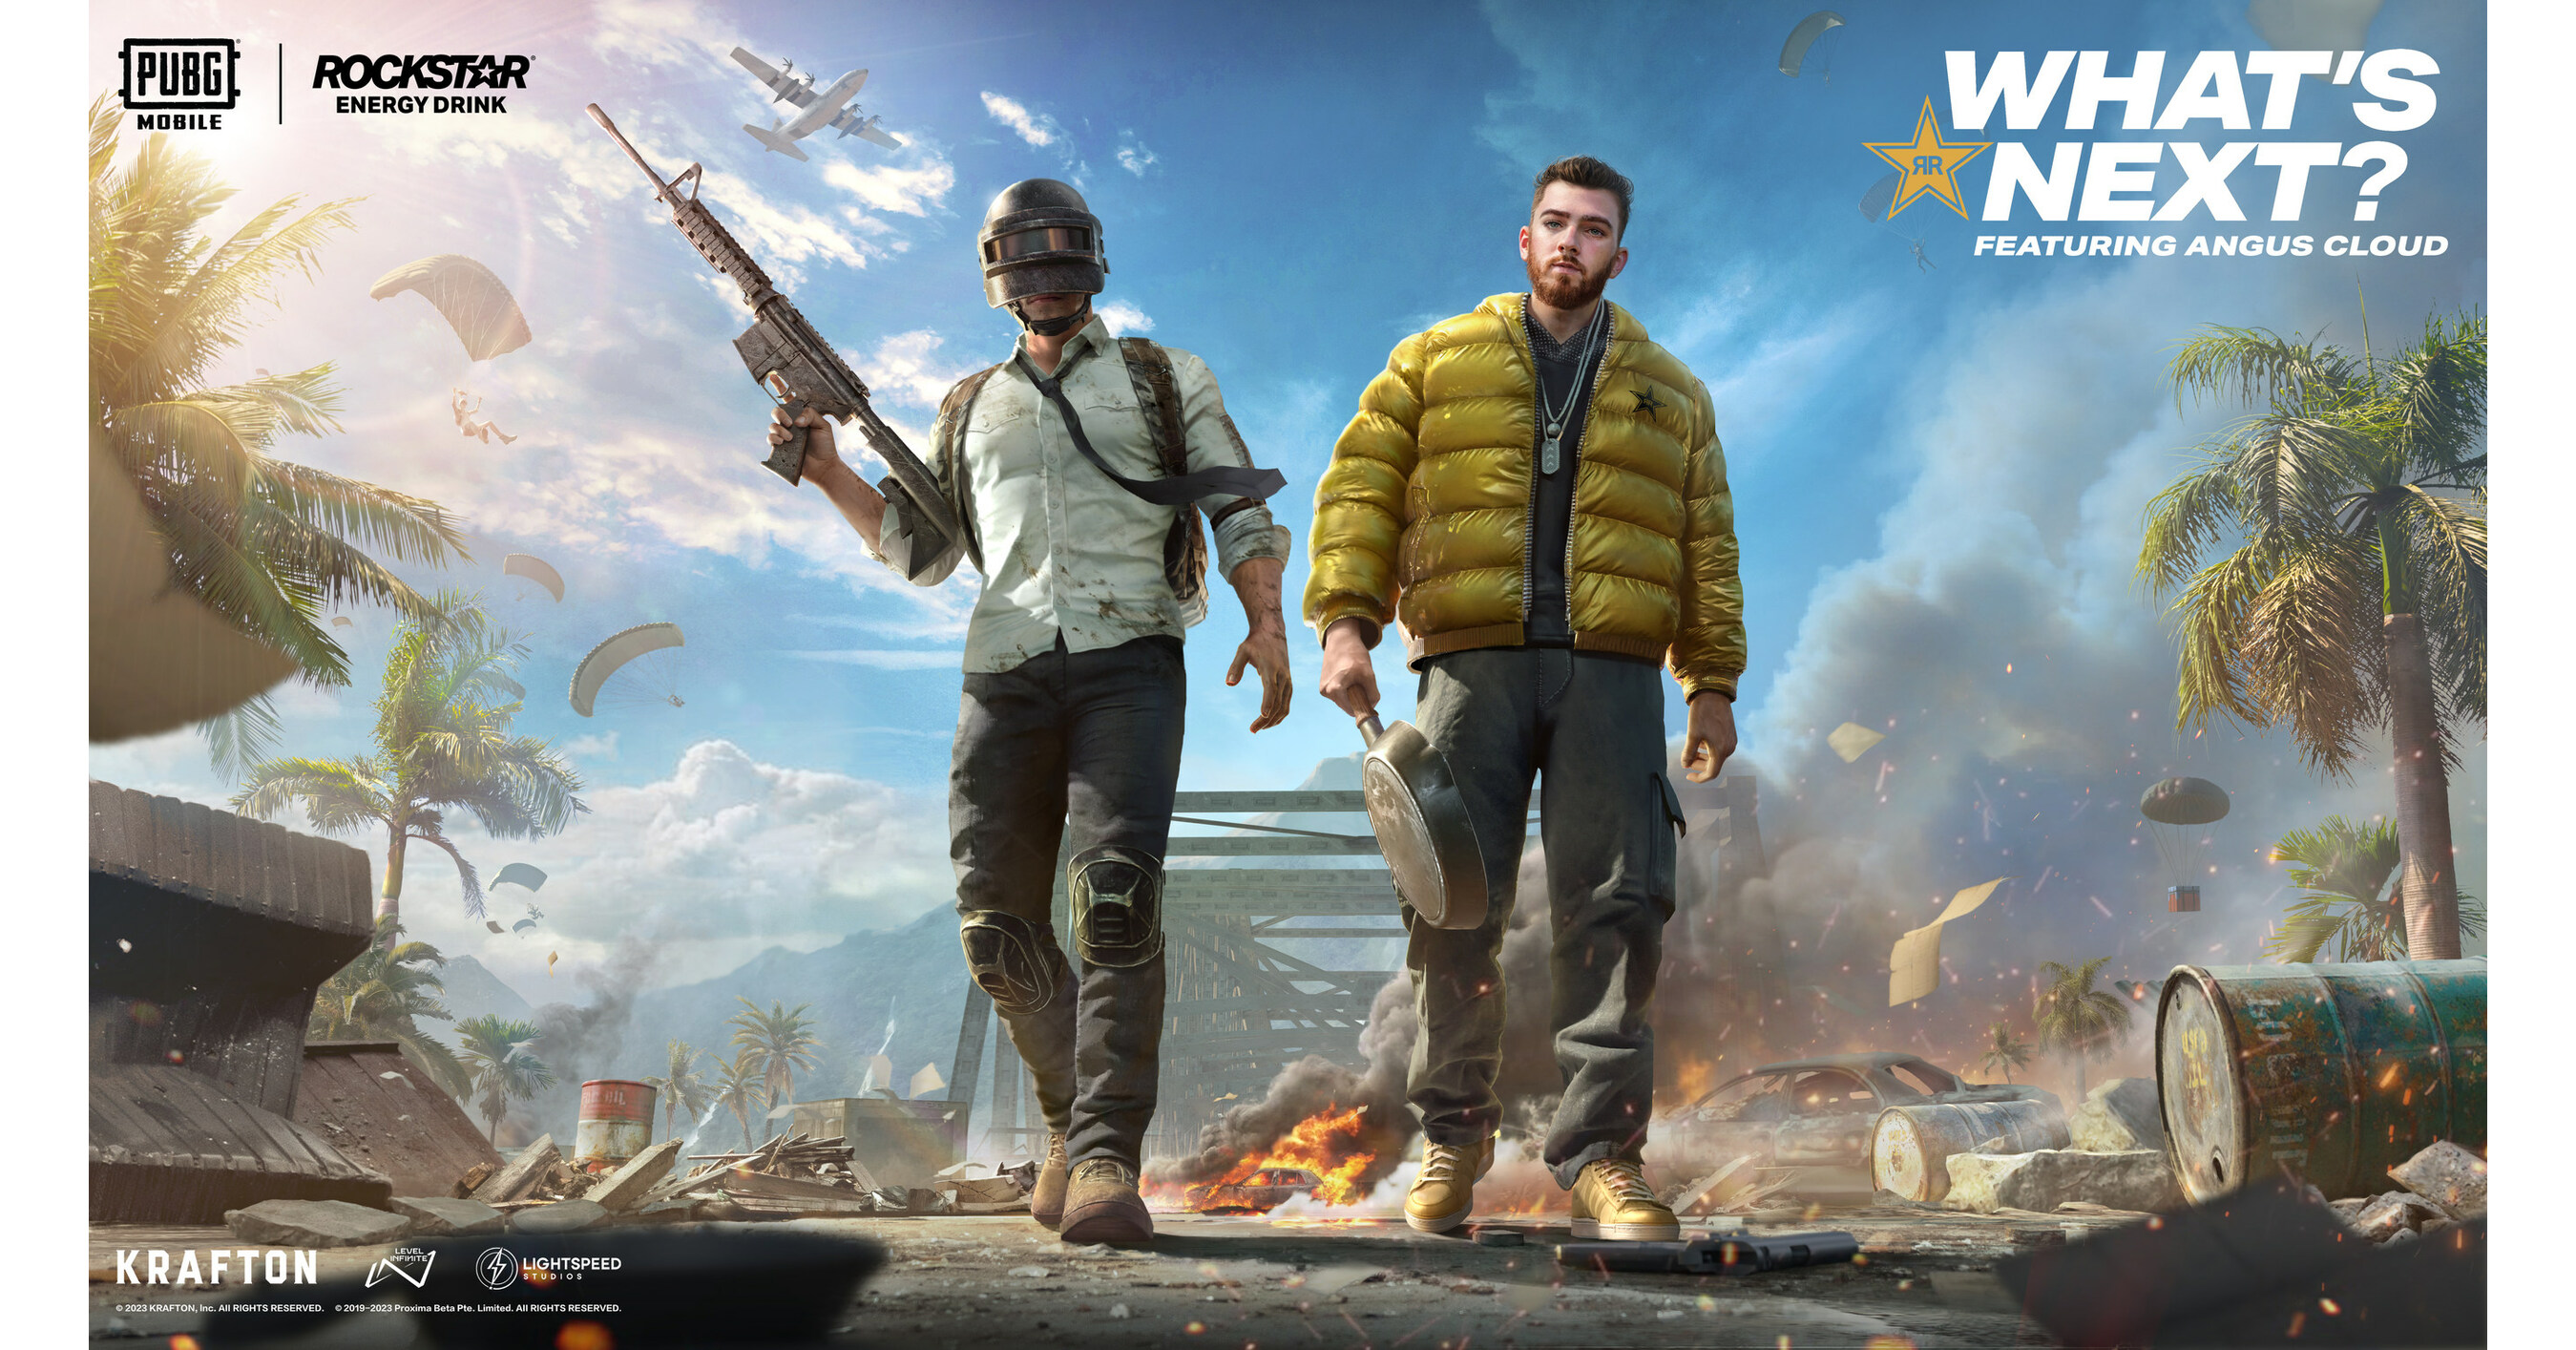 pubg on pc 2019, Game play live, Long drive